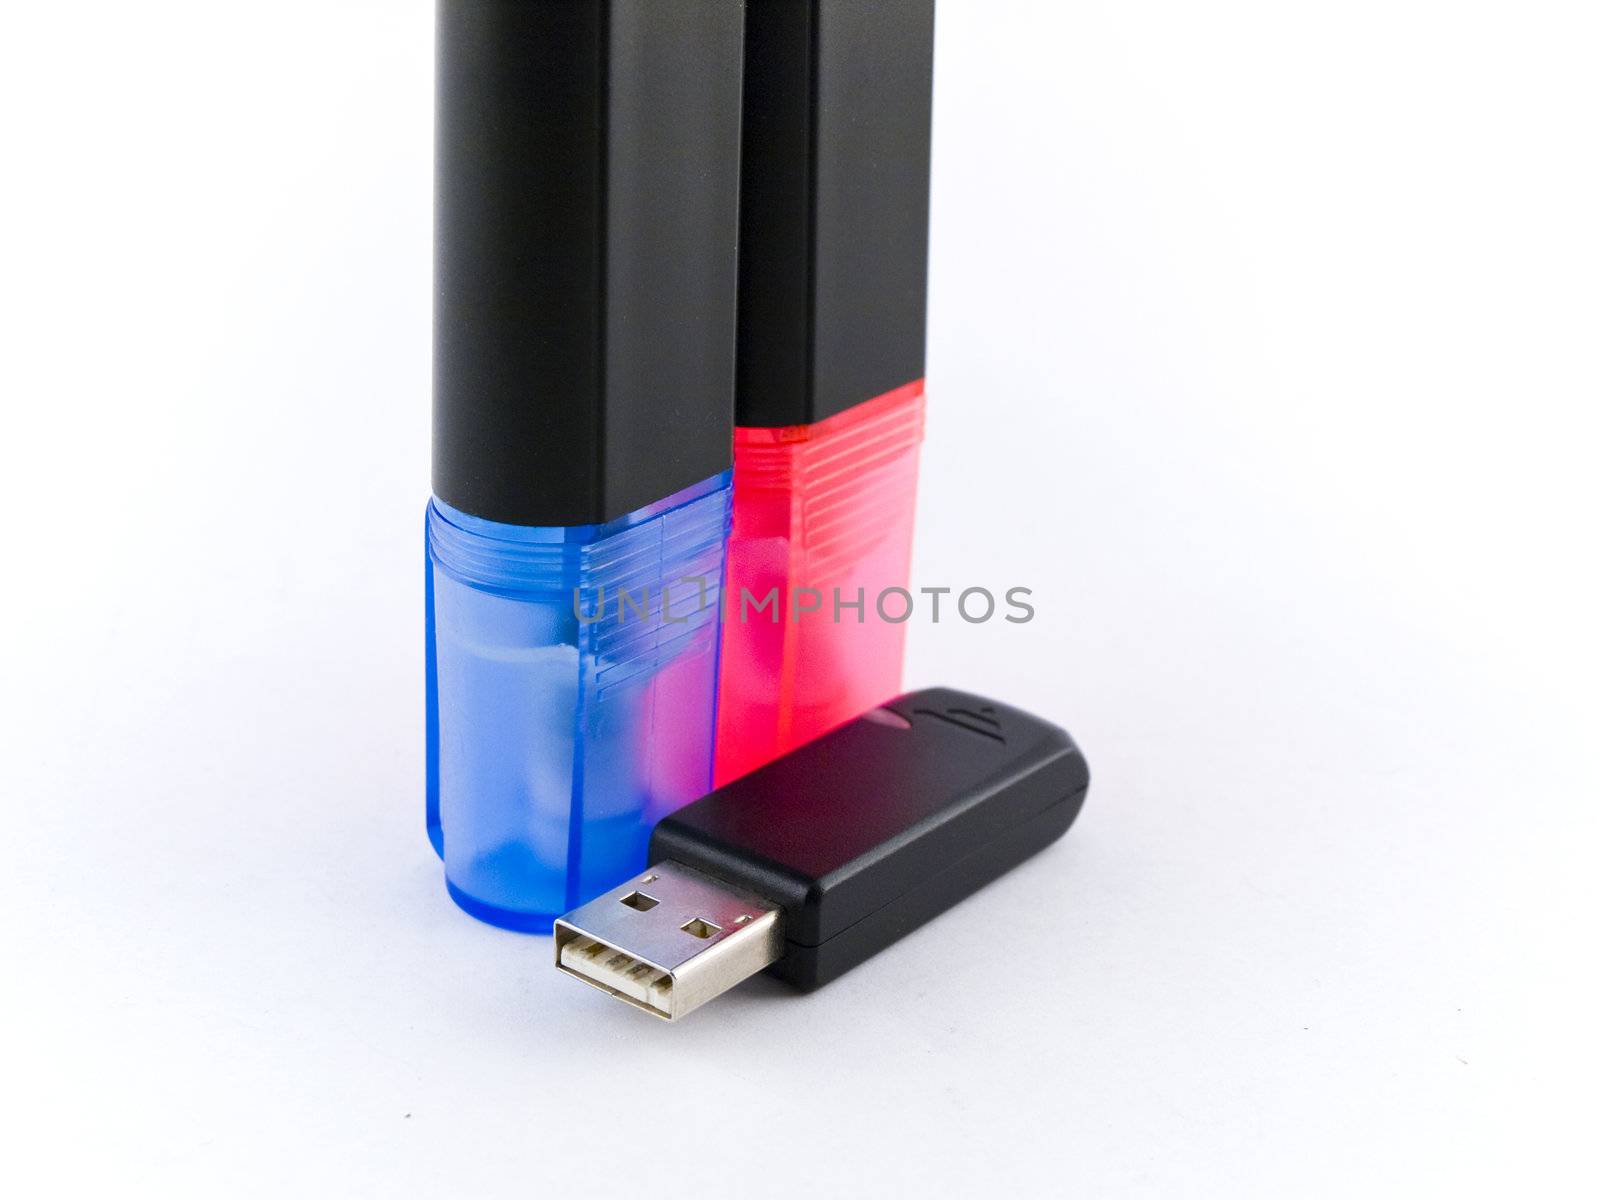 Bluetooth Dongle Memory Stick and Markers on White Background by bobbigmac